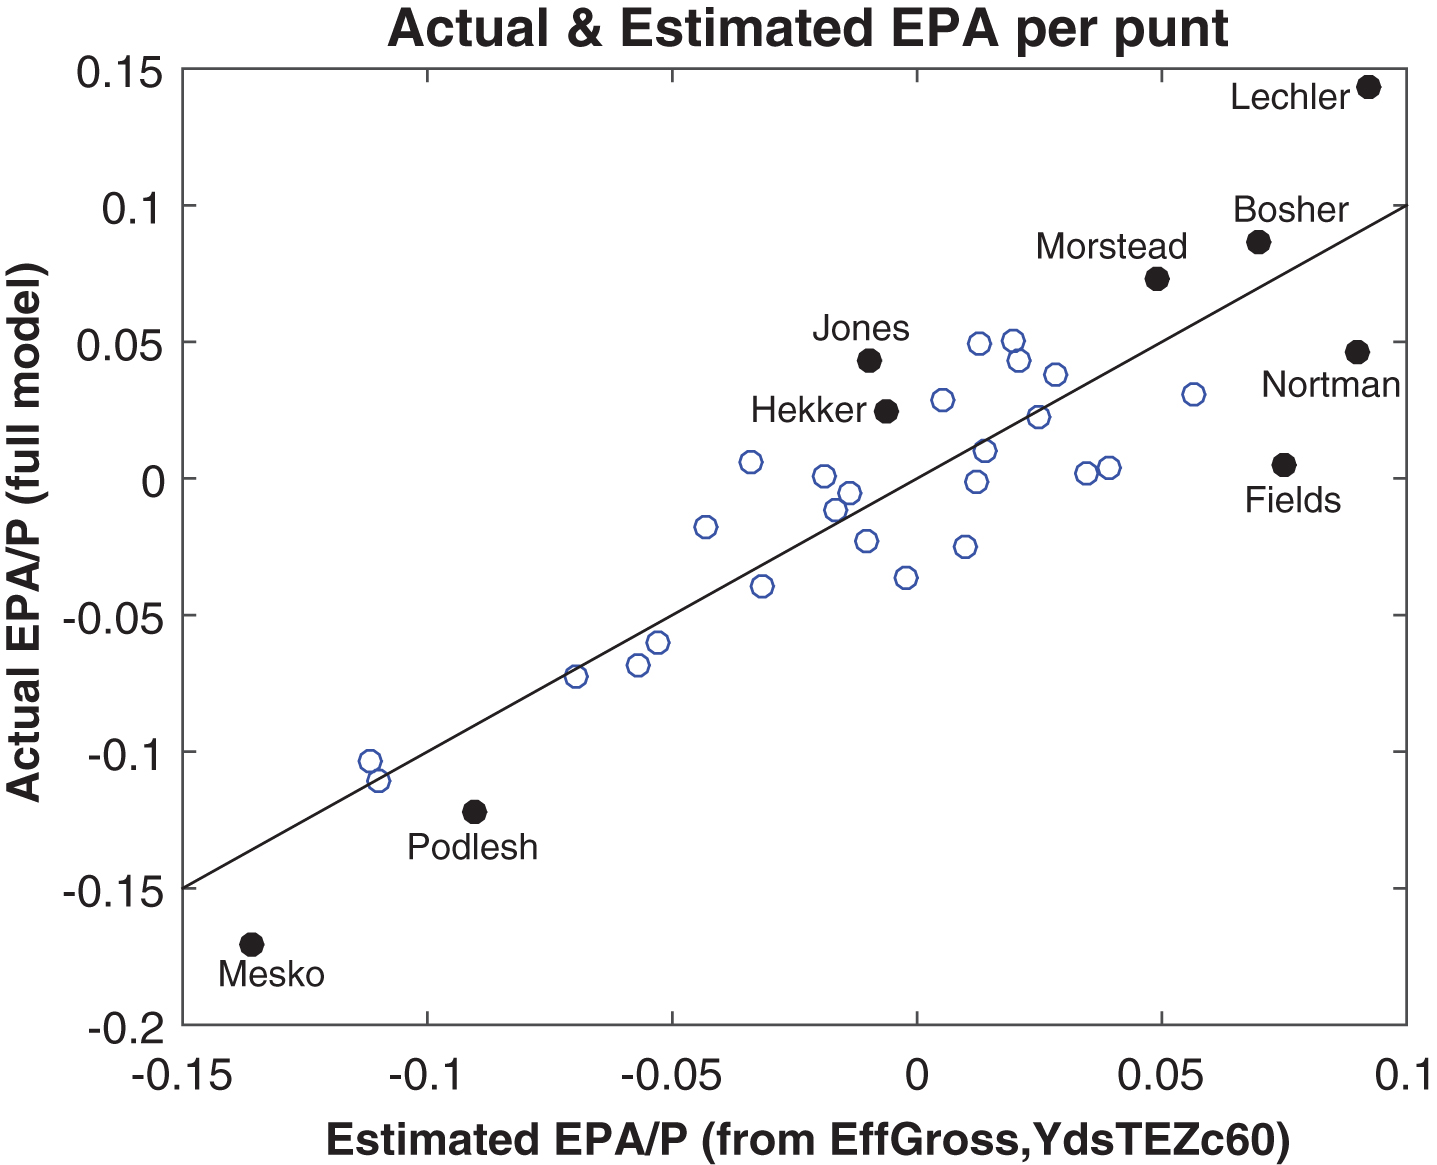 Actual EPA per punt versus an estimate using effective gross and field position, 2013.